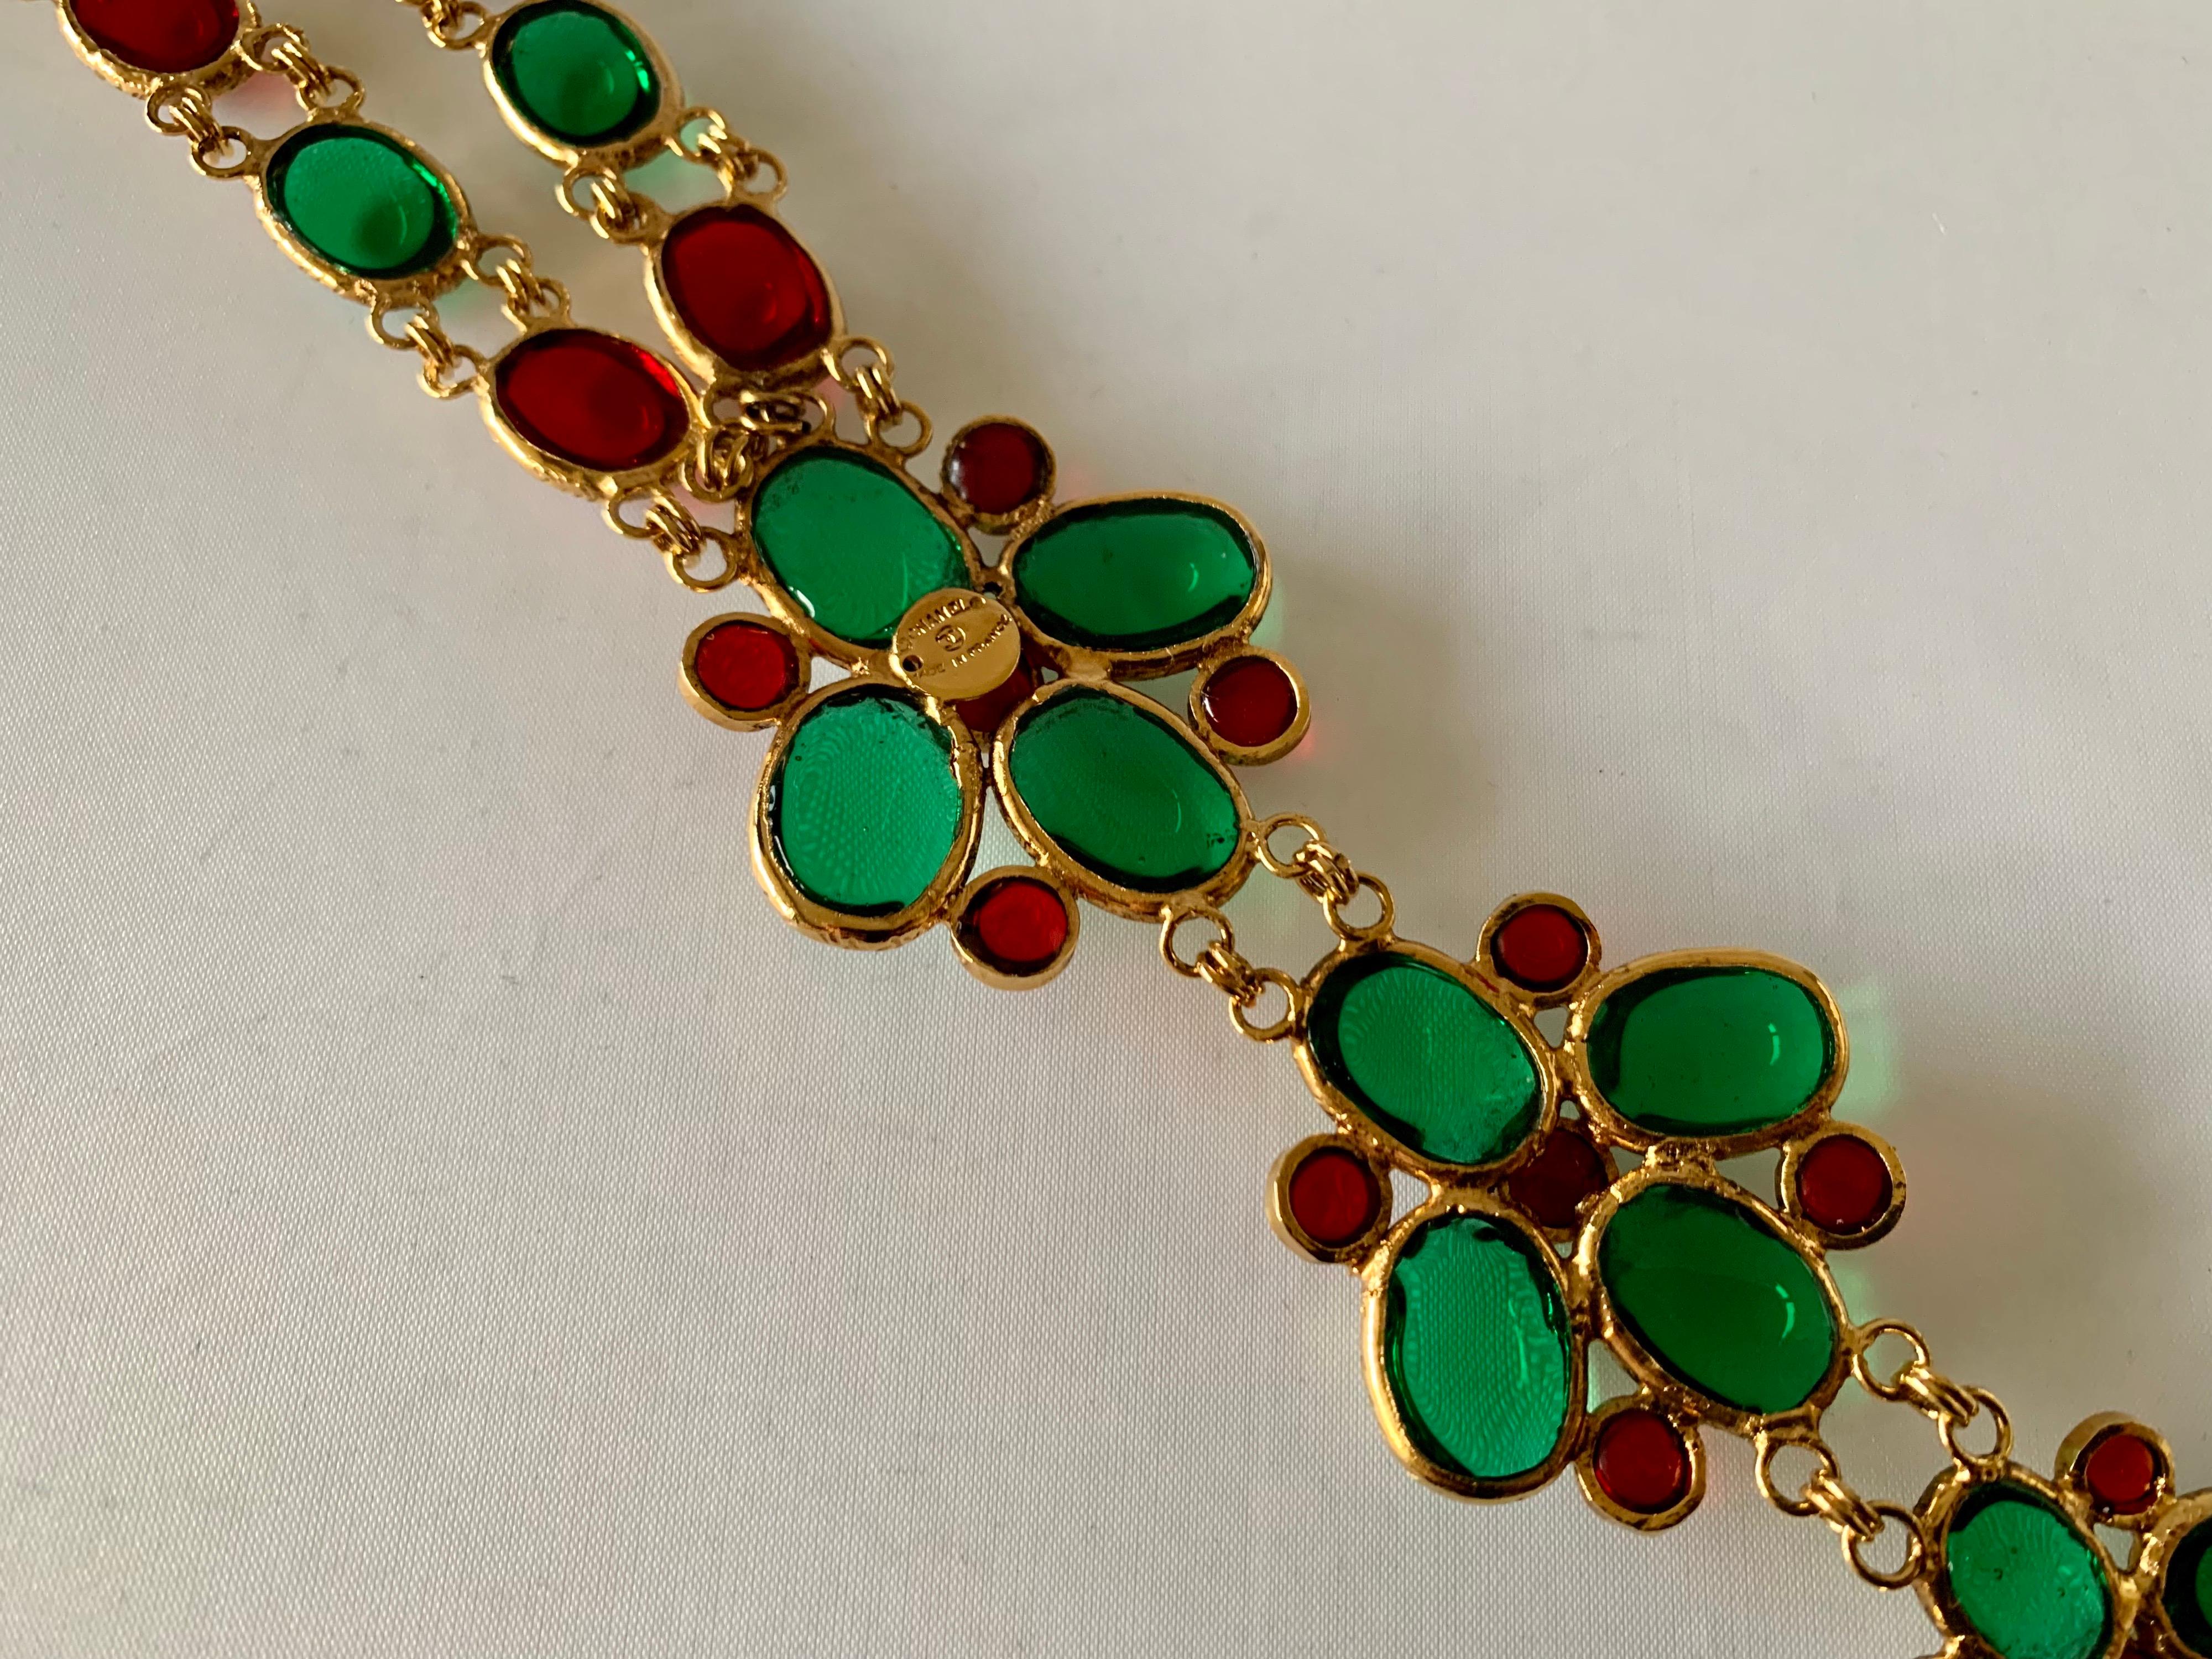 Women's Vintage Coco Chanel Gilt, Green and Red Statement Necklace